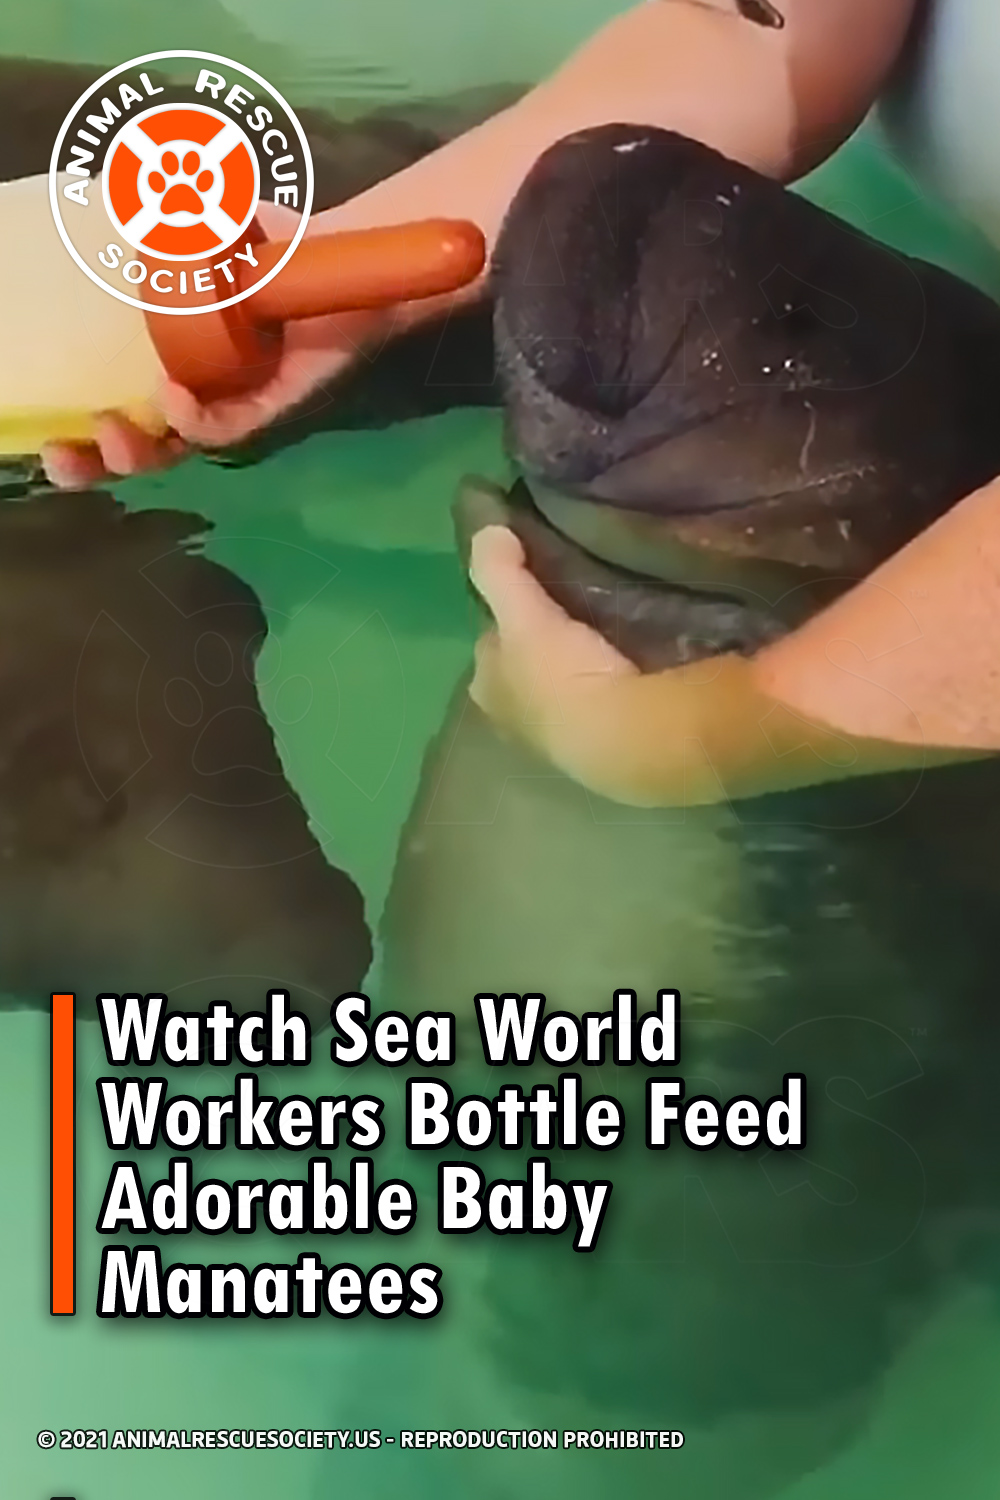 Watch Sea World Workers Bottle Feed Adorable Baby Manatees